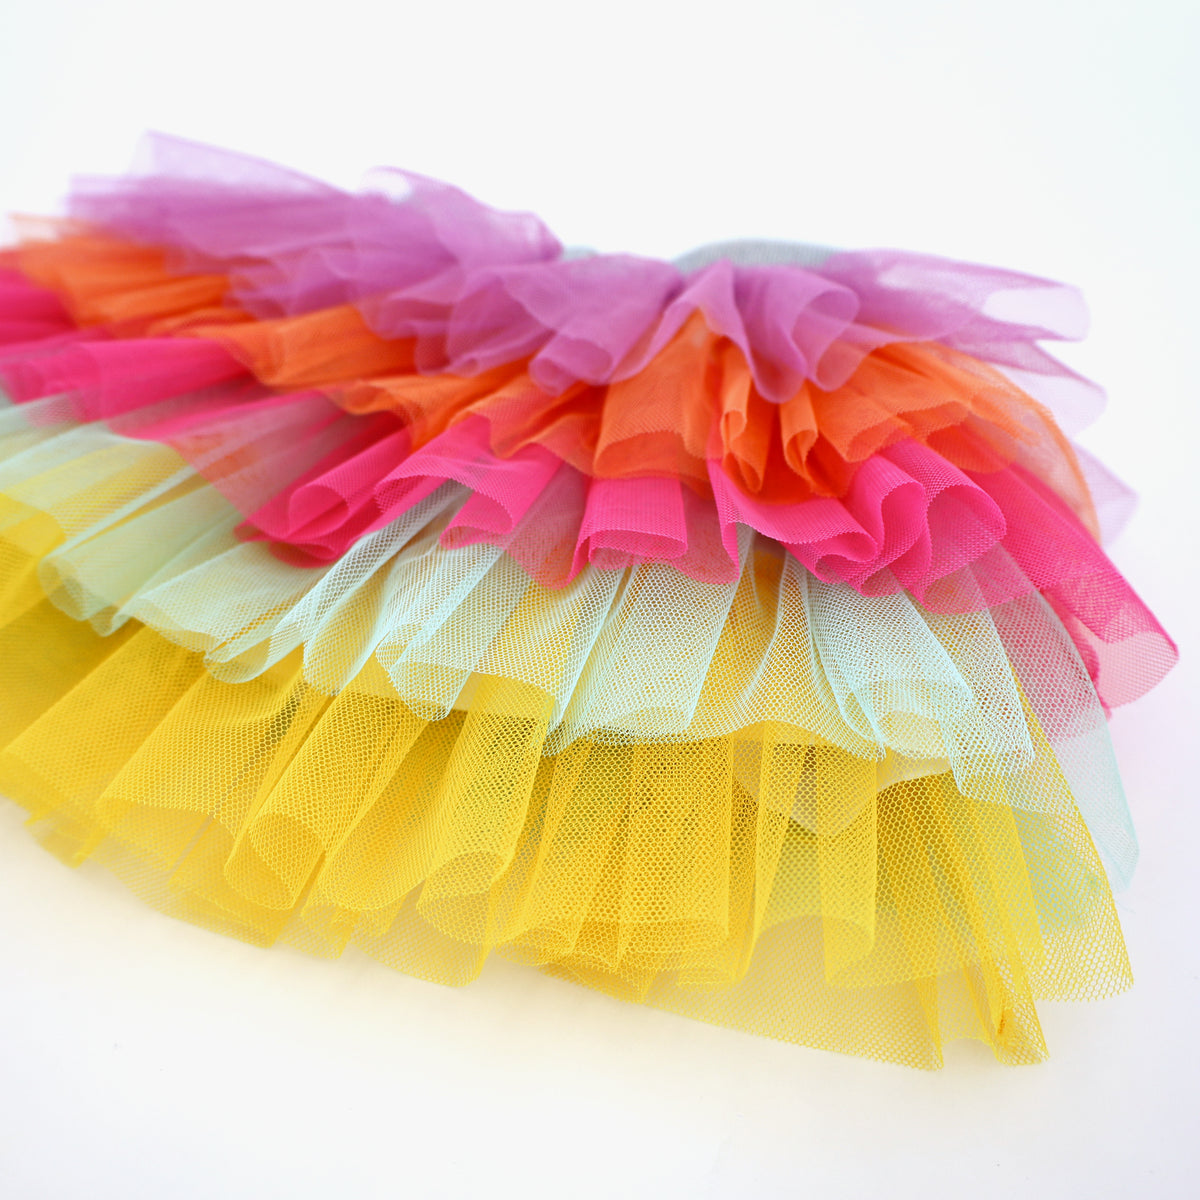 oh baby! Ombre Layered Skirt - Brightest Rainbow